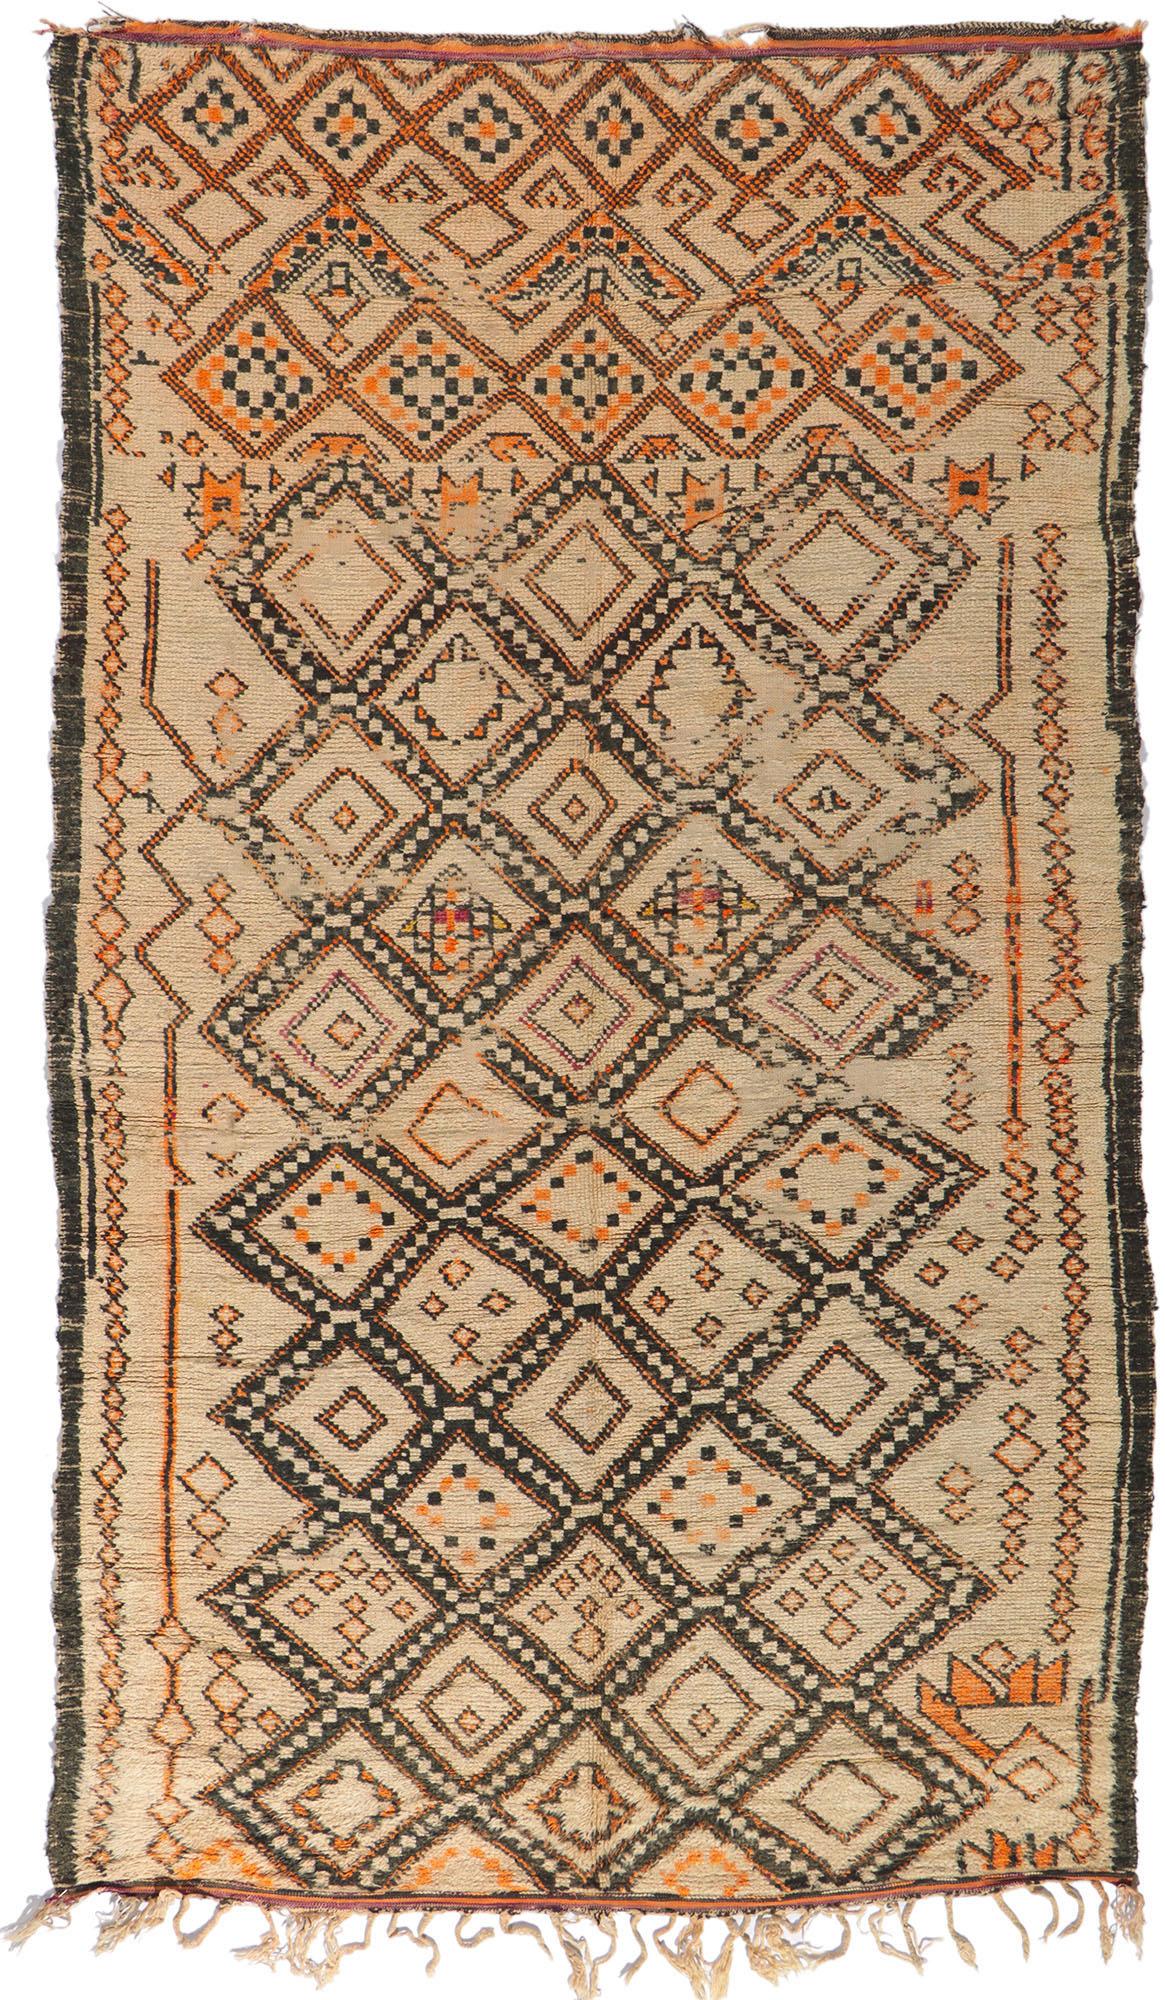 Vintage Moroccan Beni Ourain Rug, Rustic Sensibility Meets Nomadic Charm For Sale 3